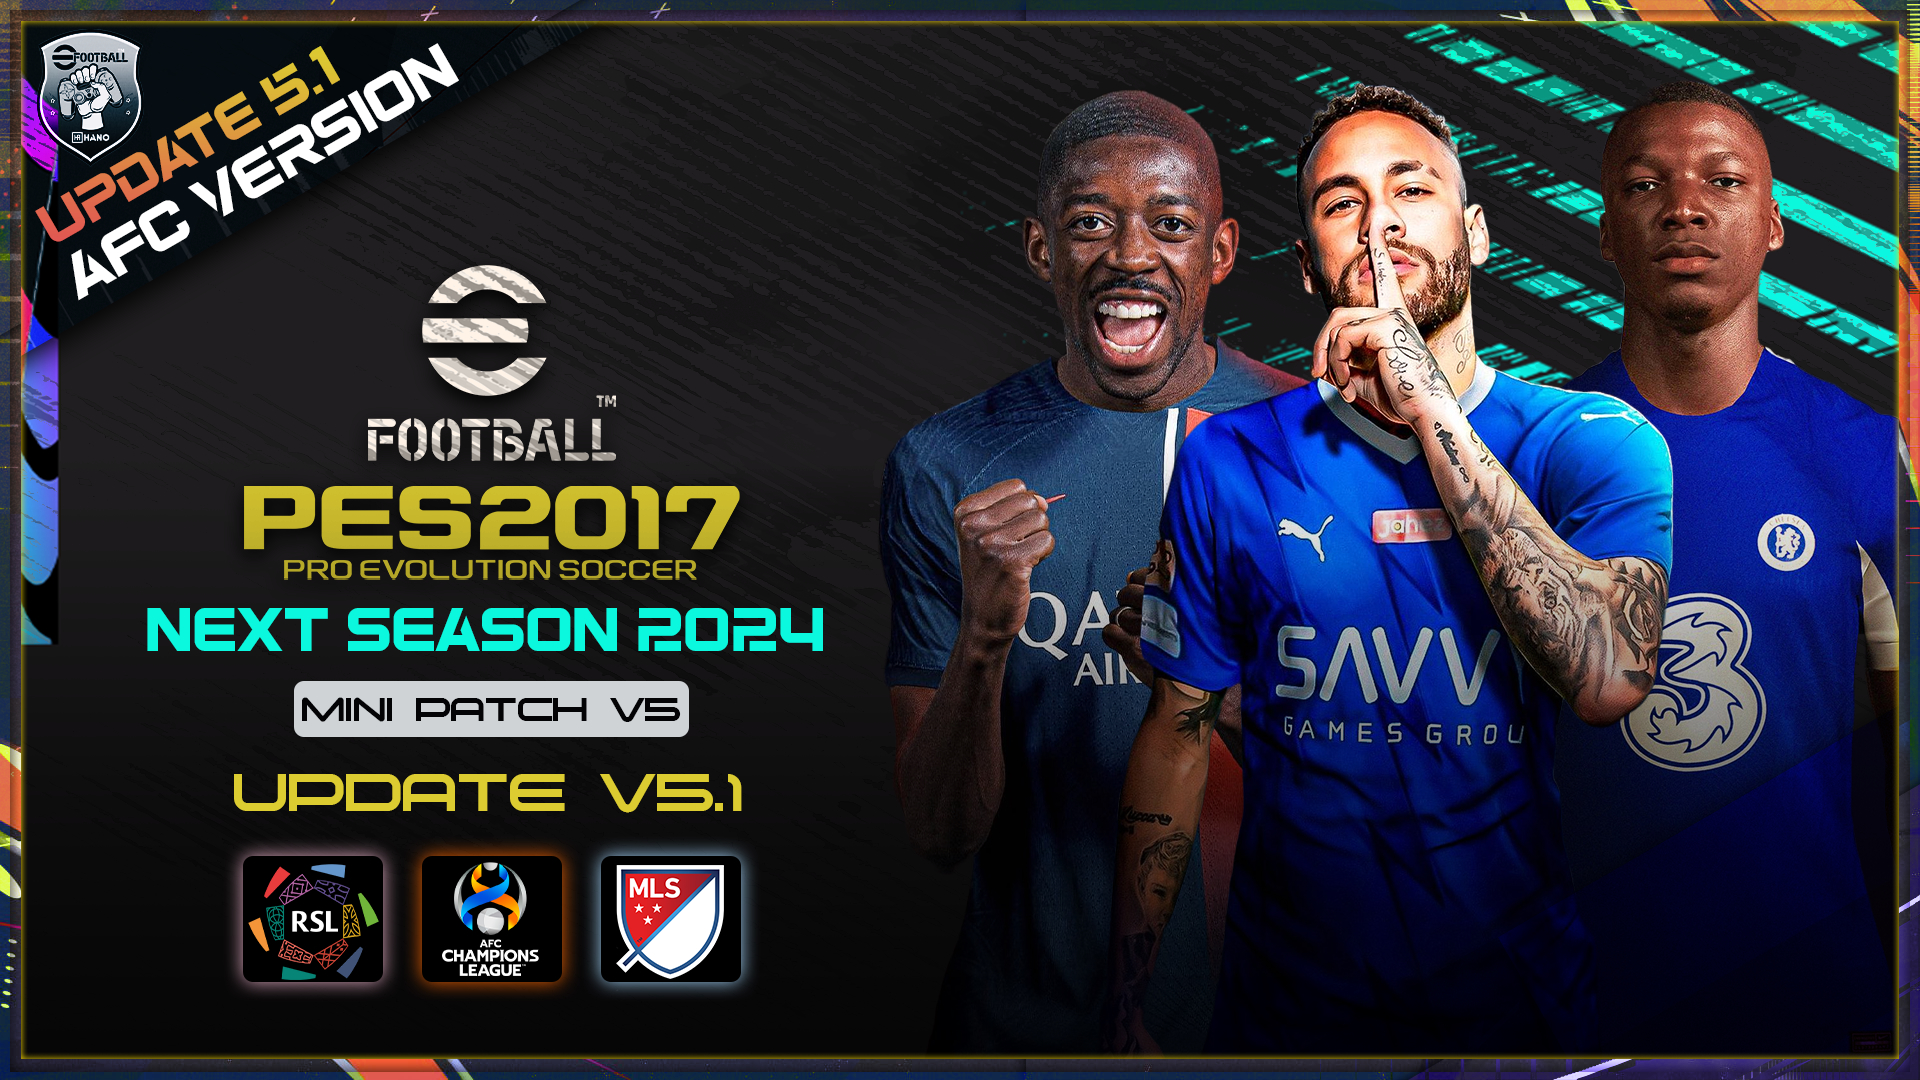 RealisticPES #BringPESBack 🇷🇺 on X: PES 2017 HANO MINI PATCH 2023 V4  REVIEW - SEASON 2023/2024 👉🏻  👉🏻   👉🏻  English, Italian,  French, Spanish Portuguese and other subtitles